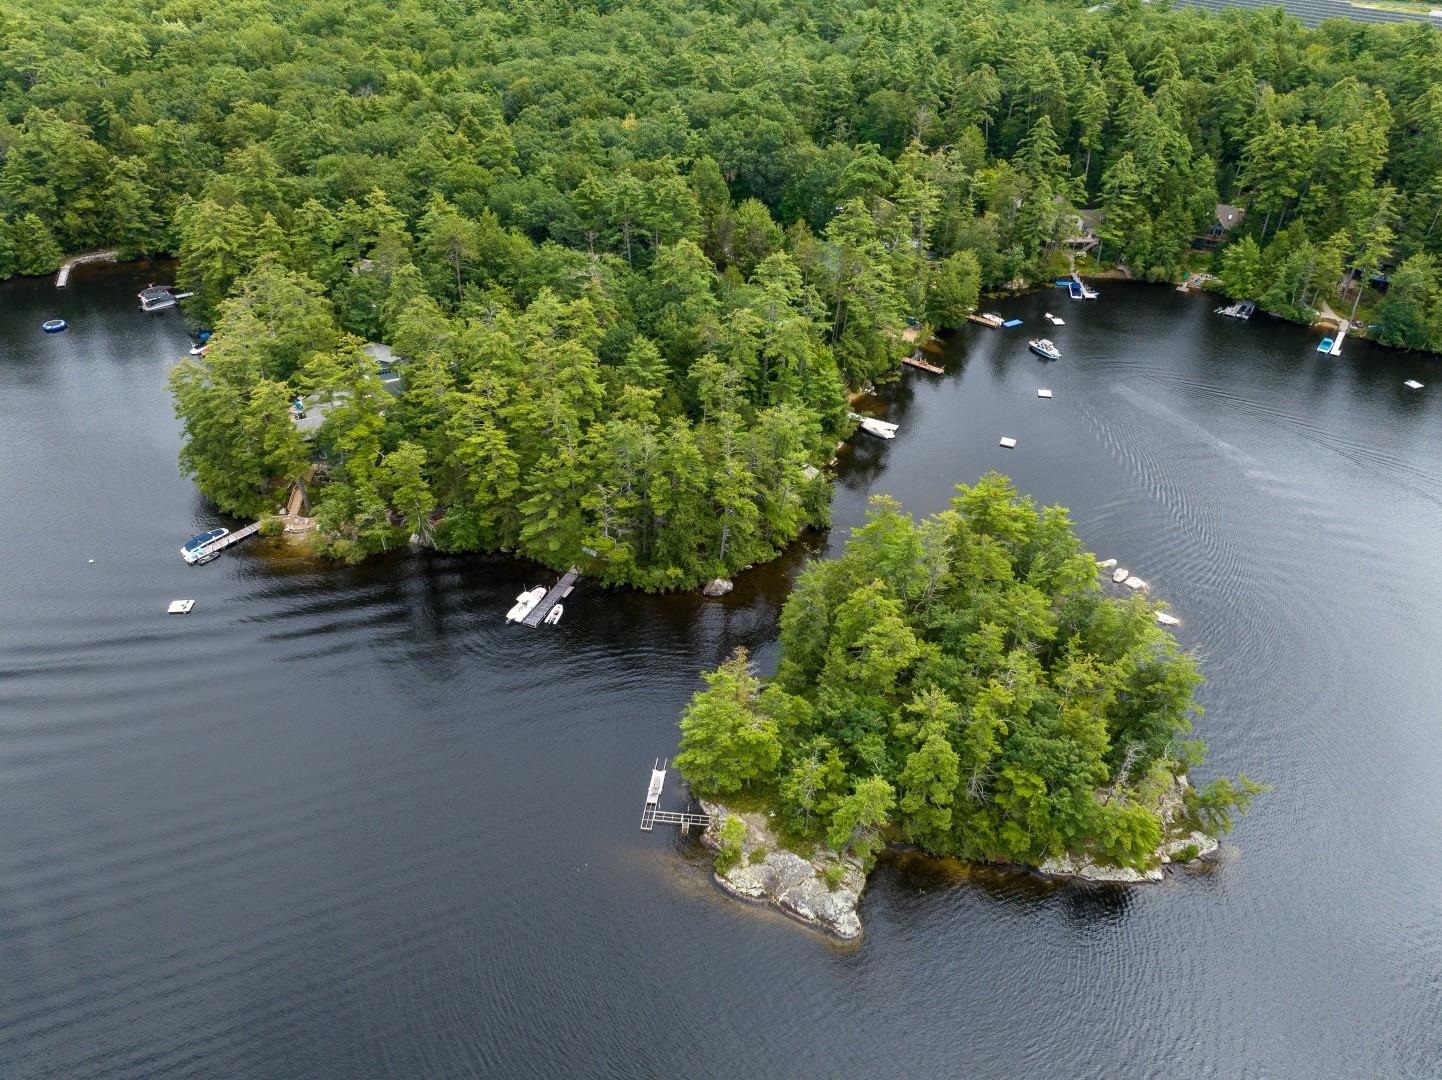 MLS 4966879: Starr Island and First Point Road, Moultonborough NH